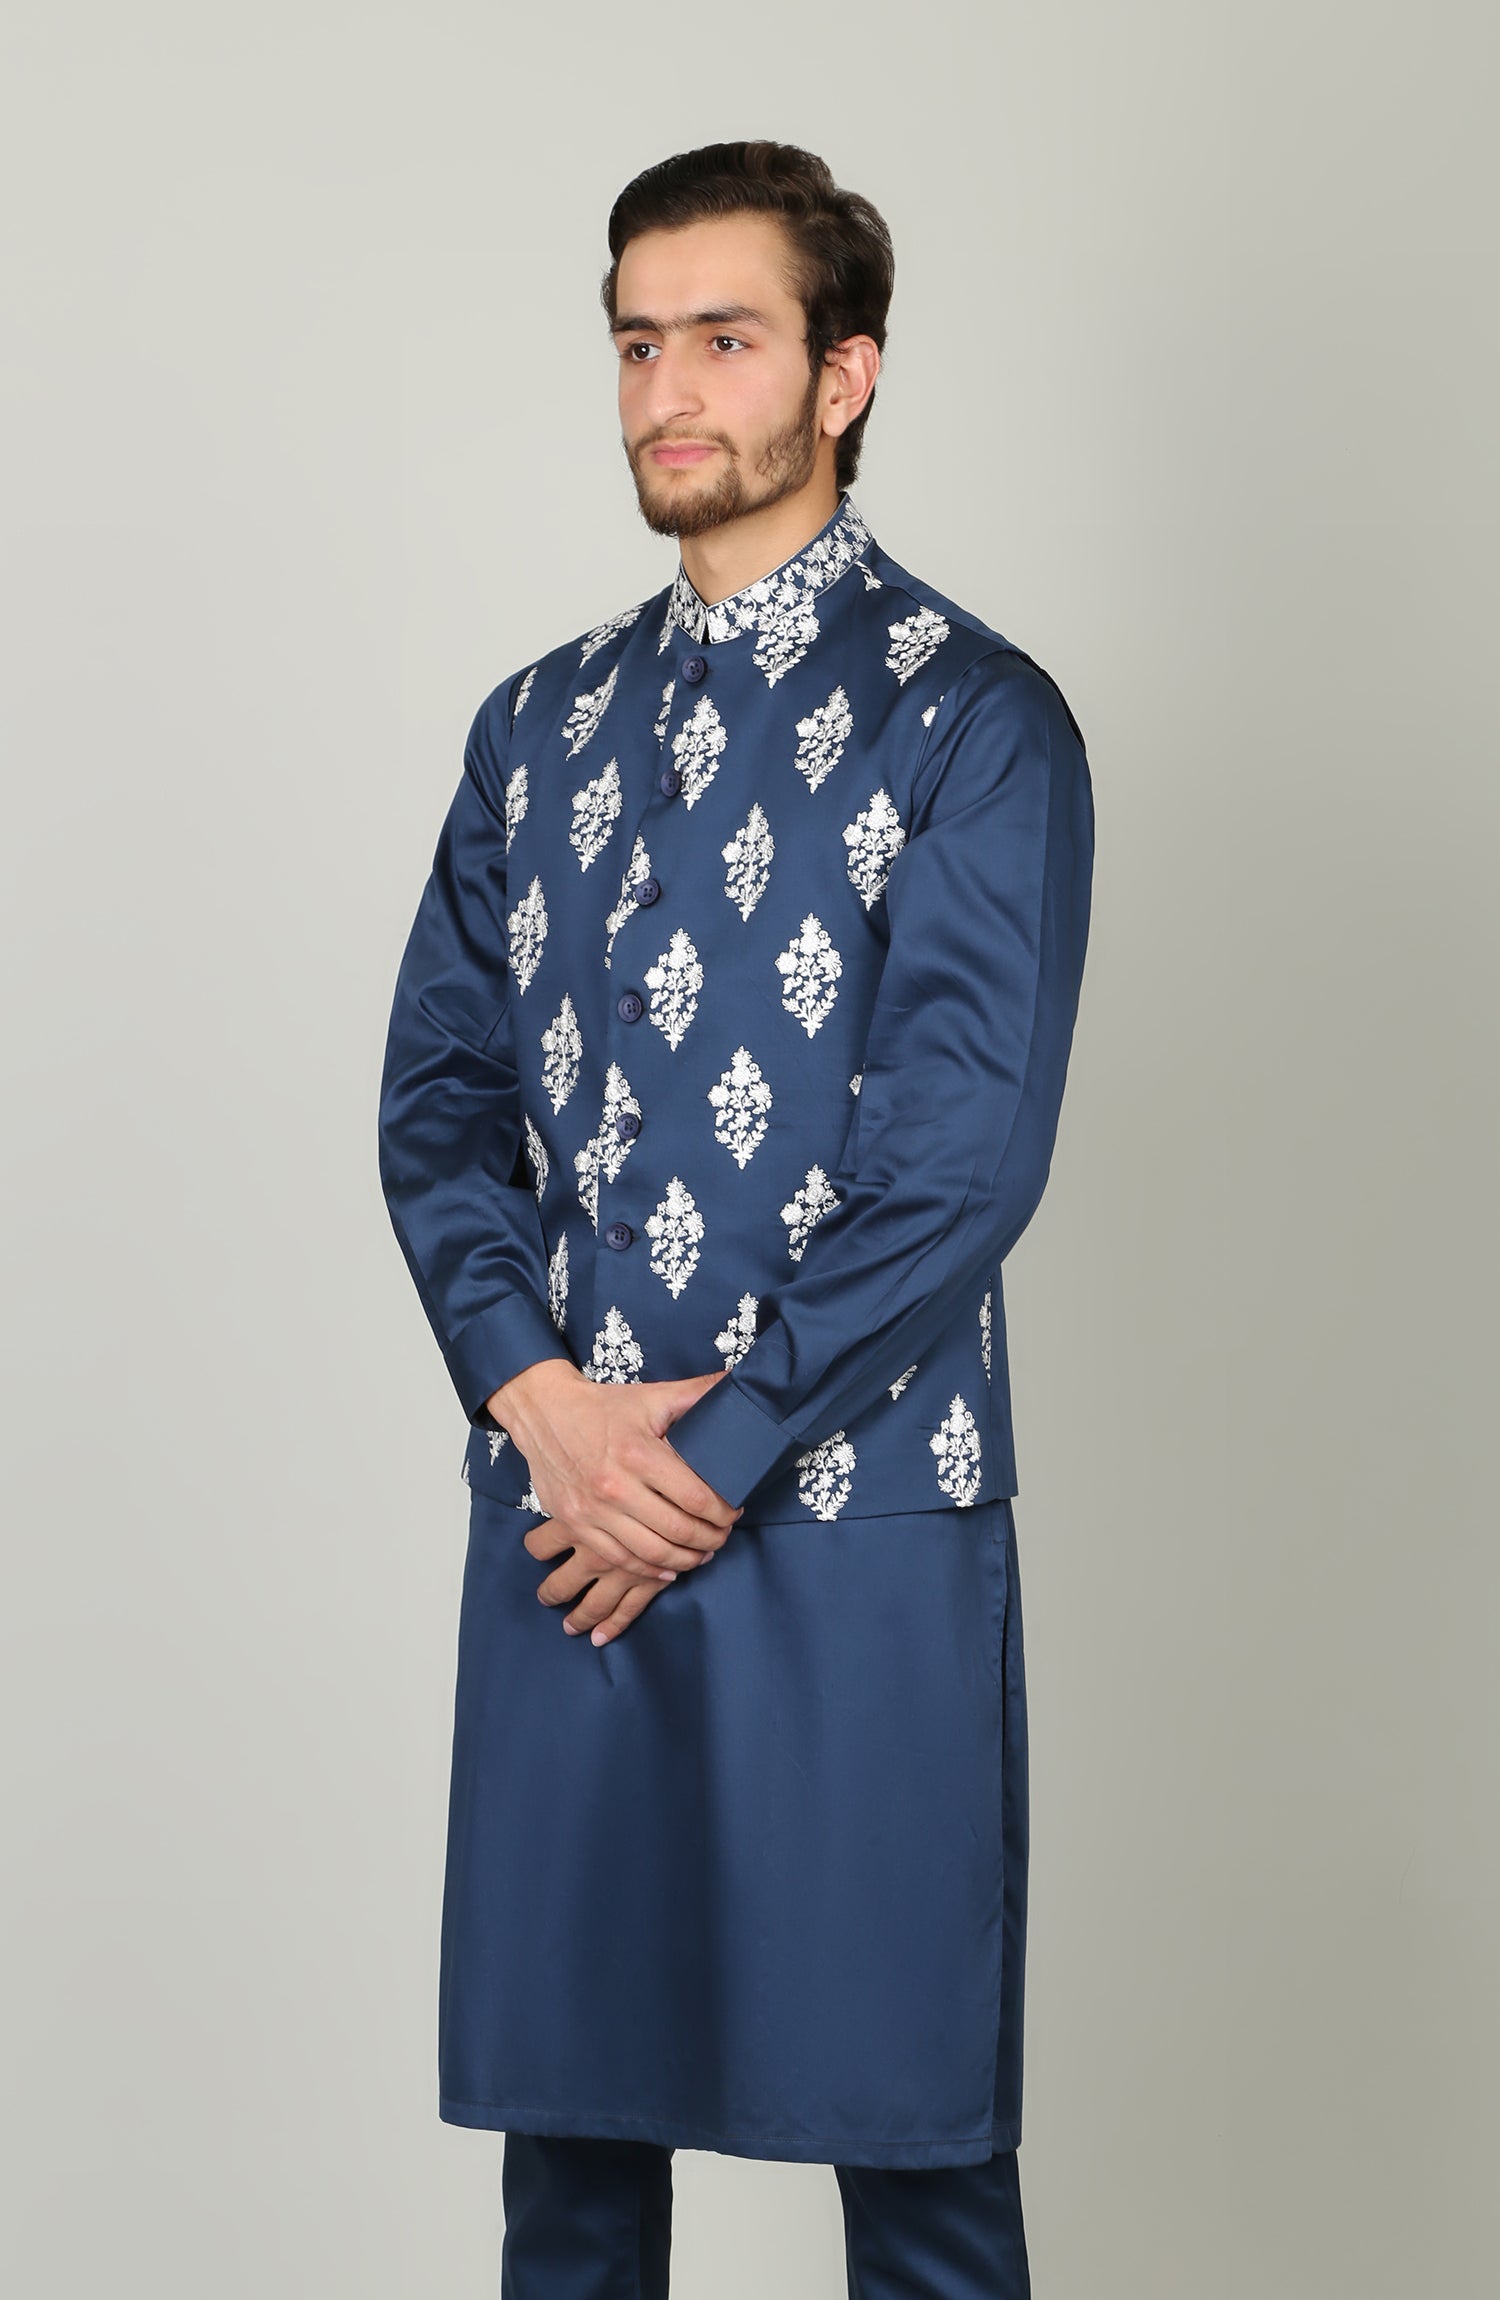 EMBROIDERED WAISTCOAT MENS SUIT